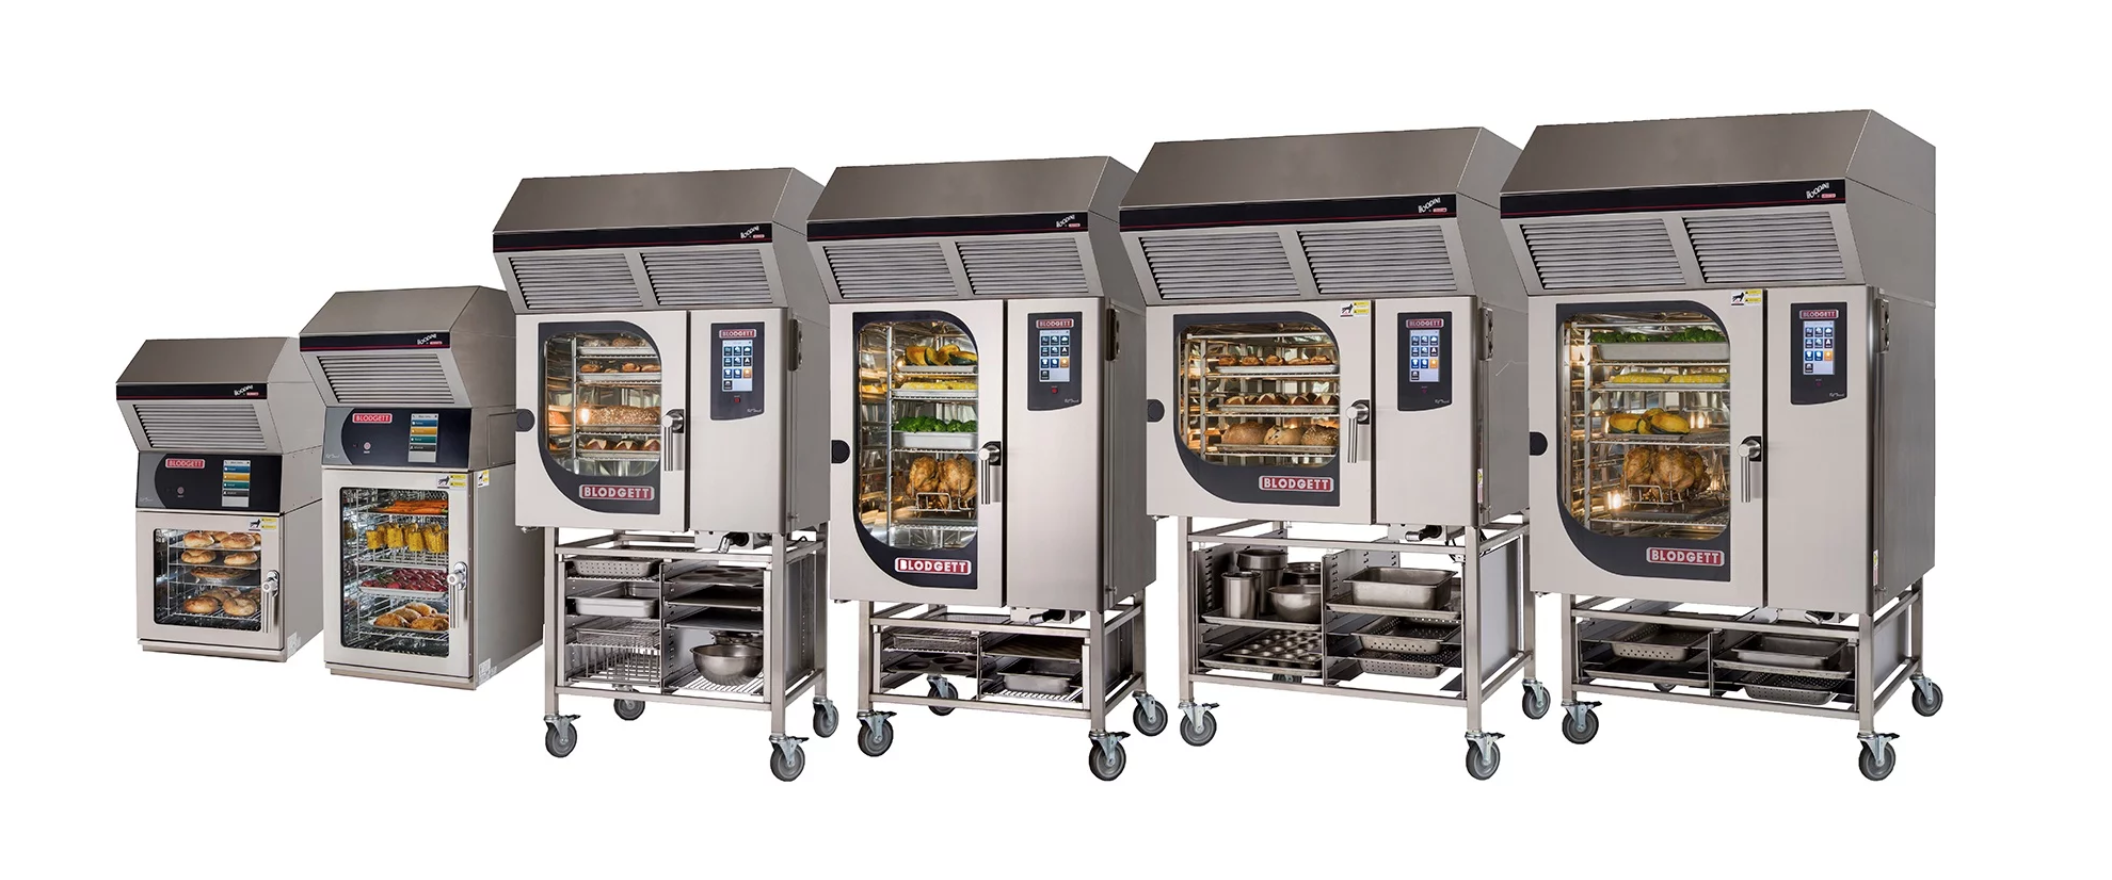 Ventless Cooking Resources for Canadian Foodservice Operators